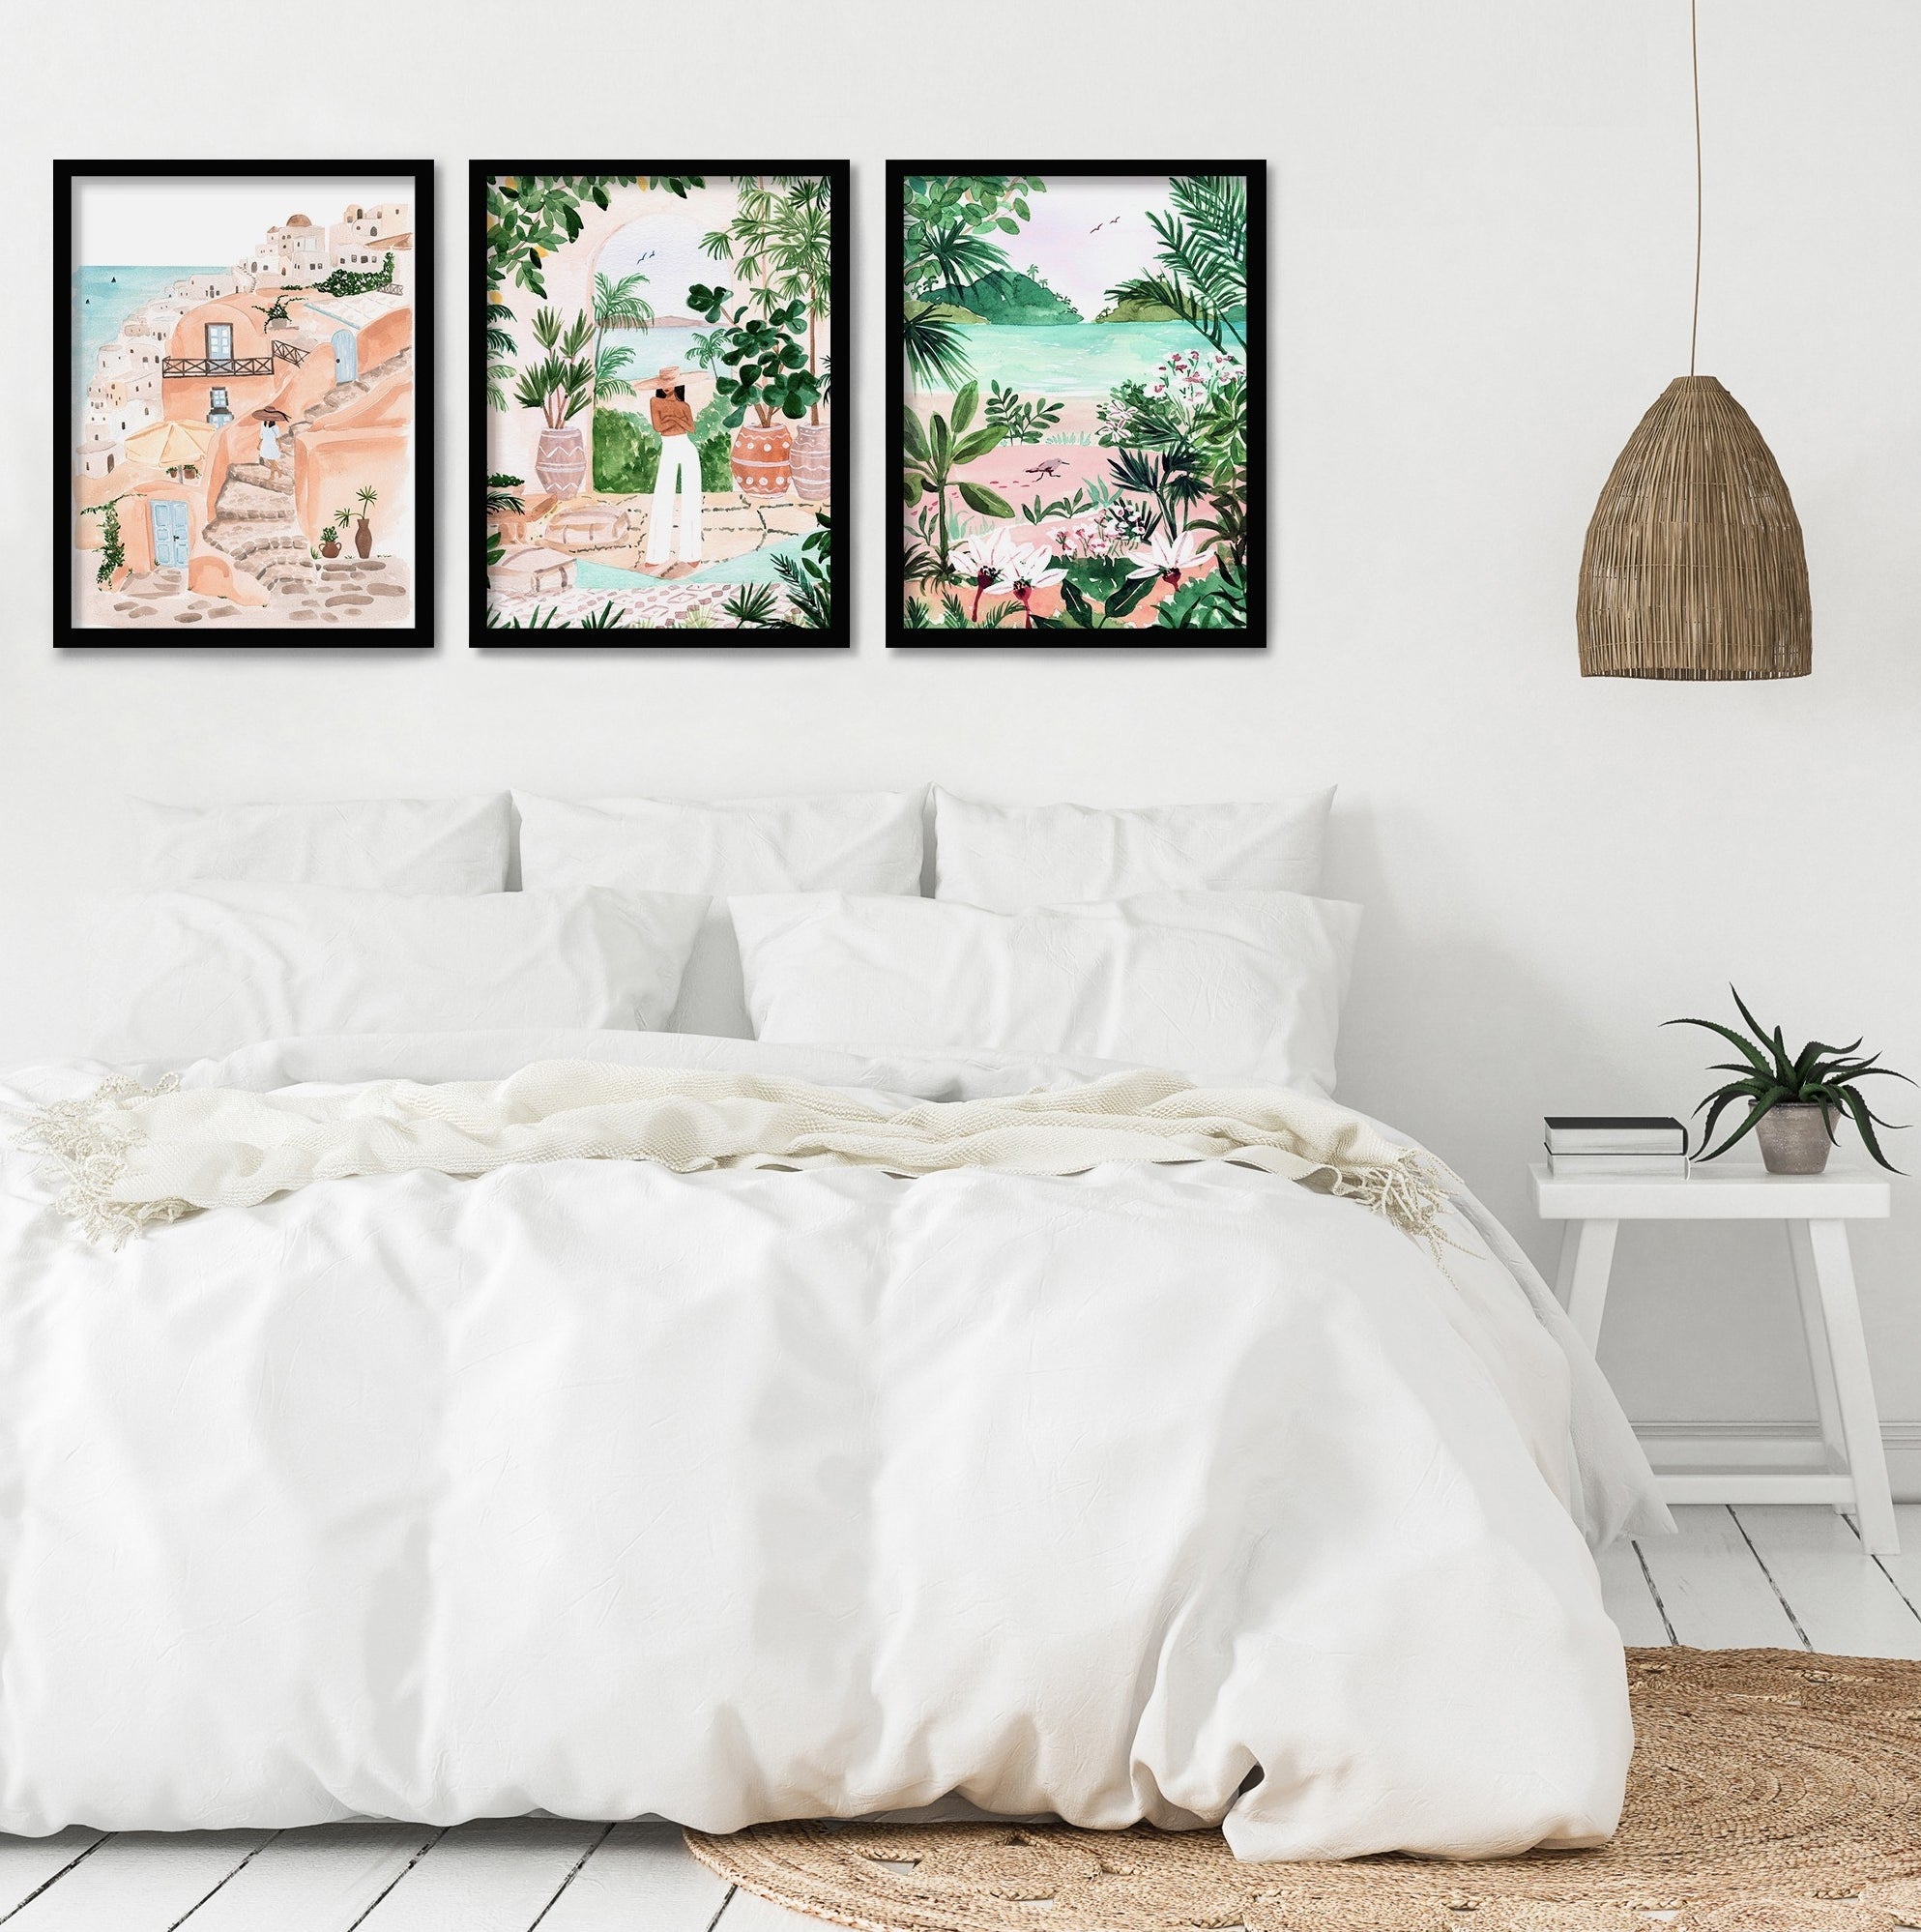 the three tropical paintings above a bed